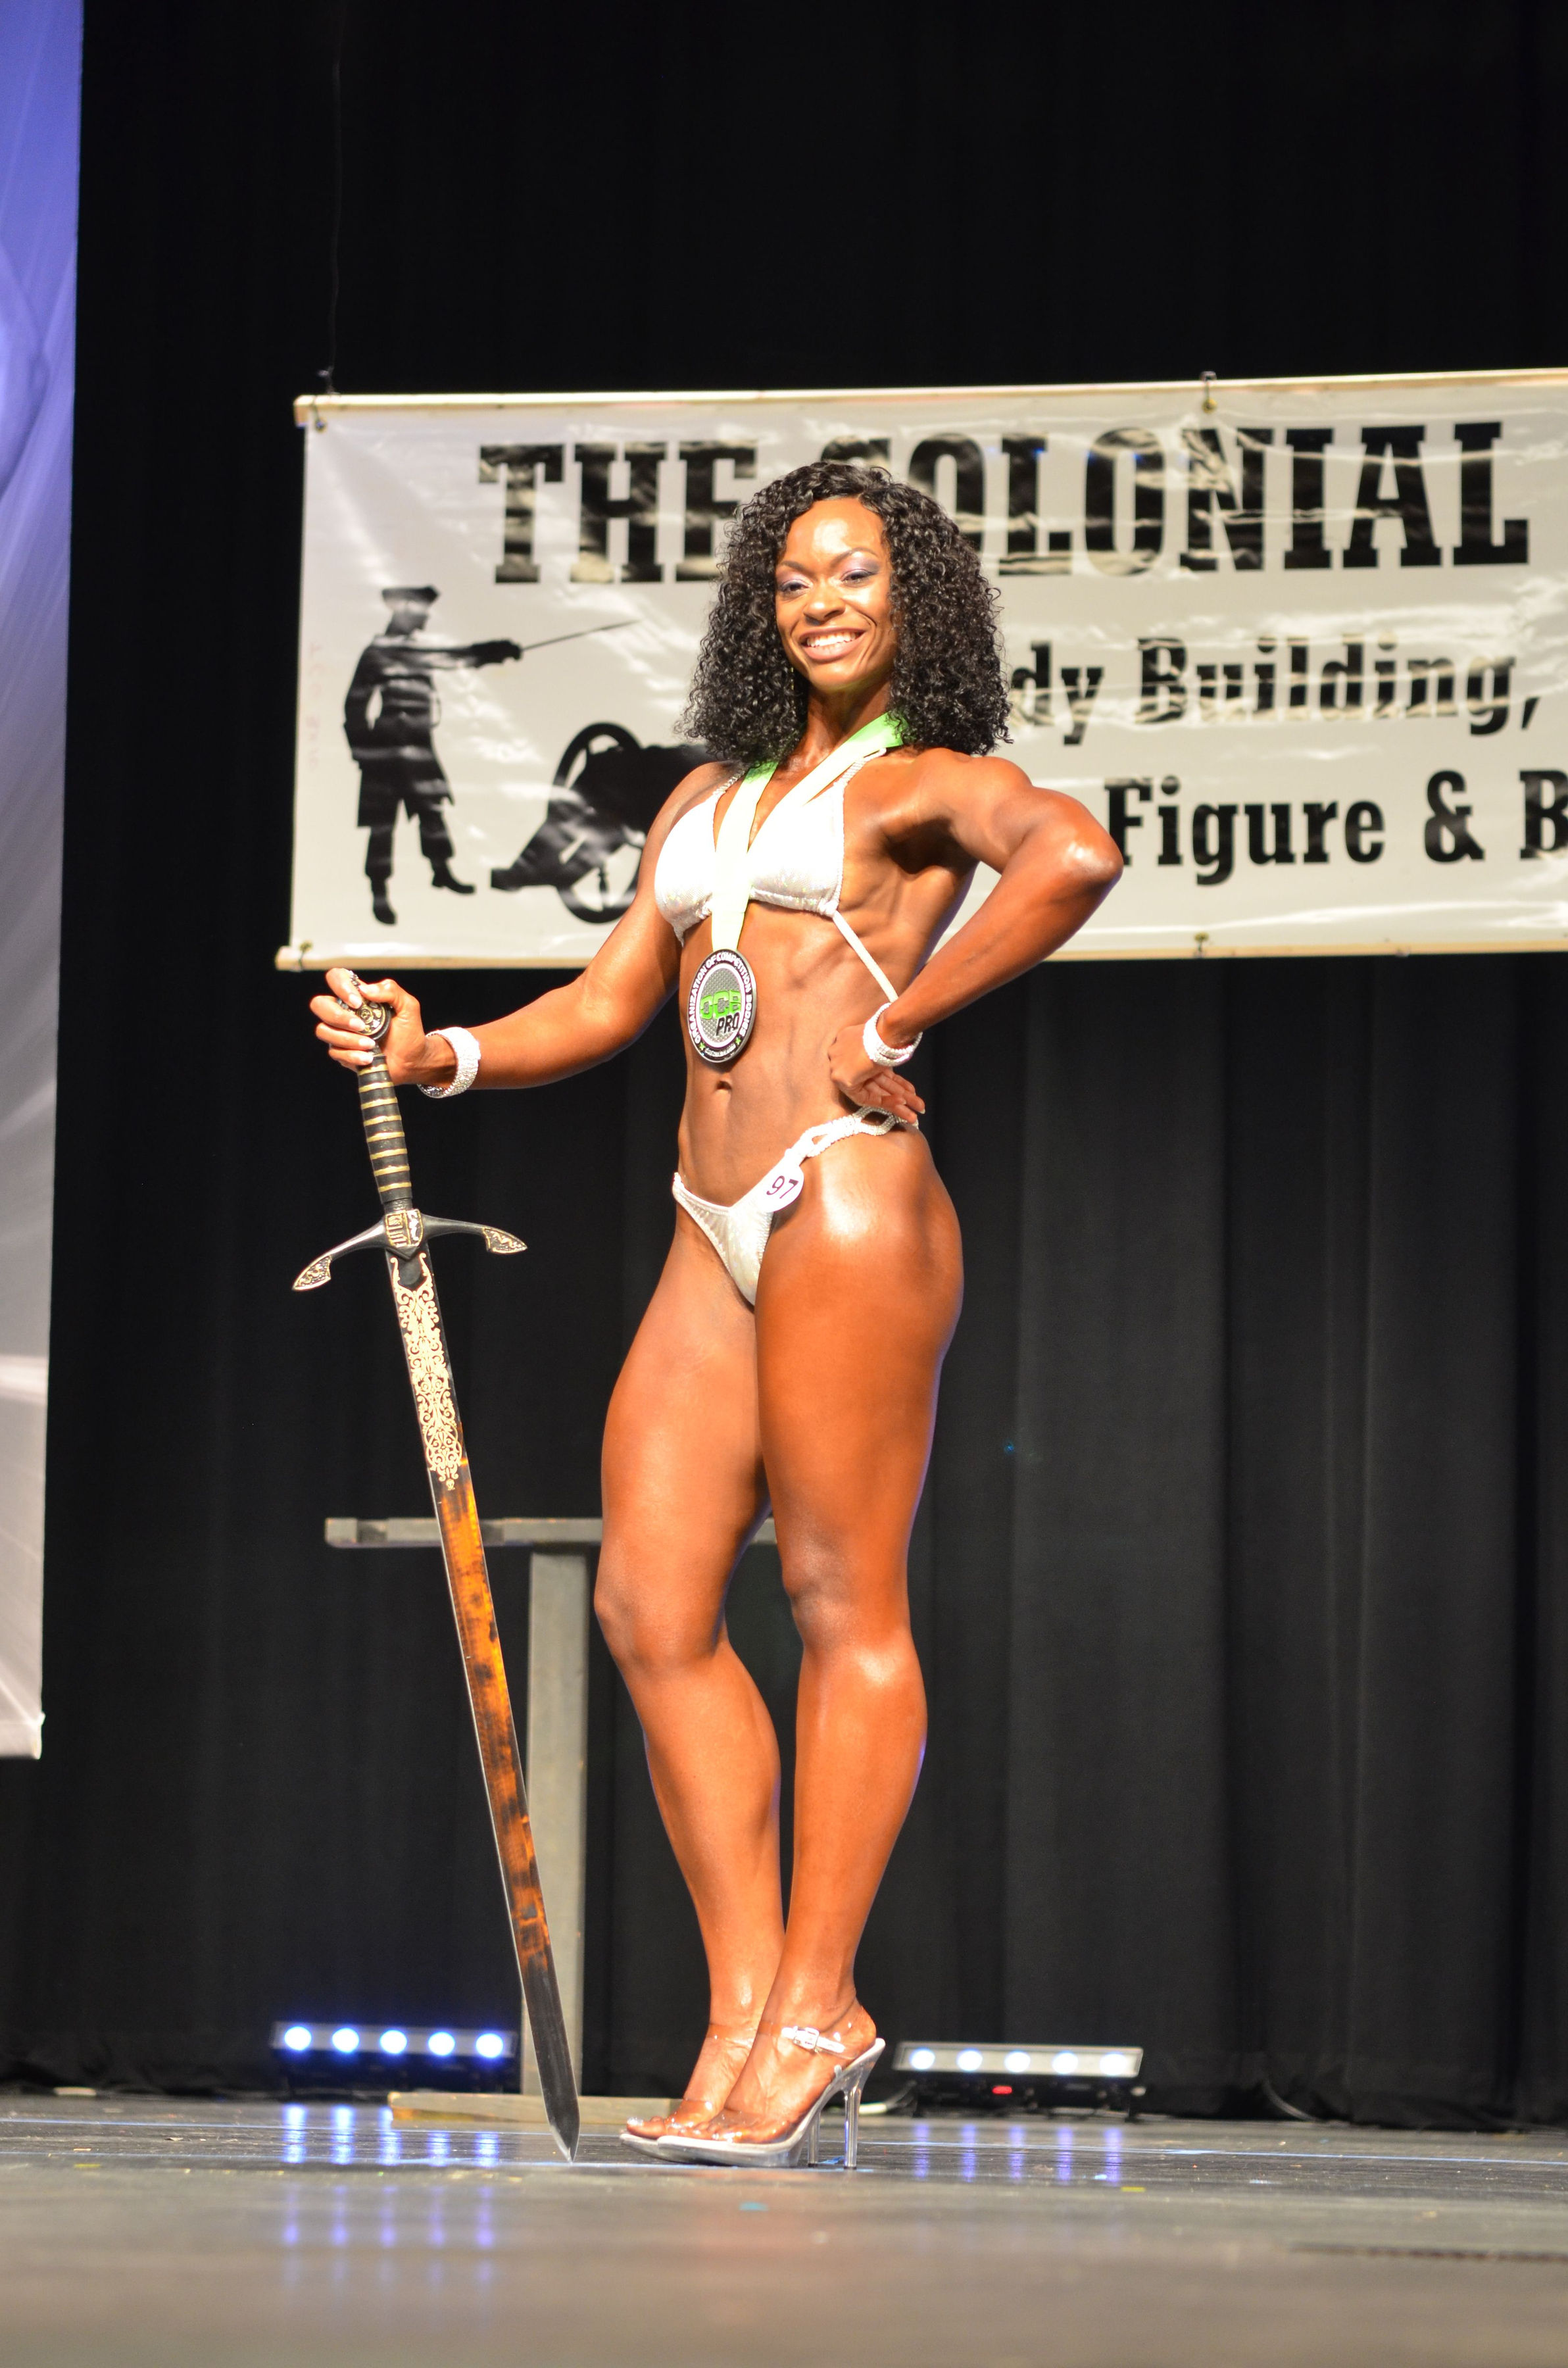 Natural Bodybuilding Contests Physique Contests image photo